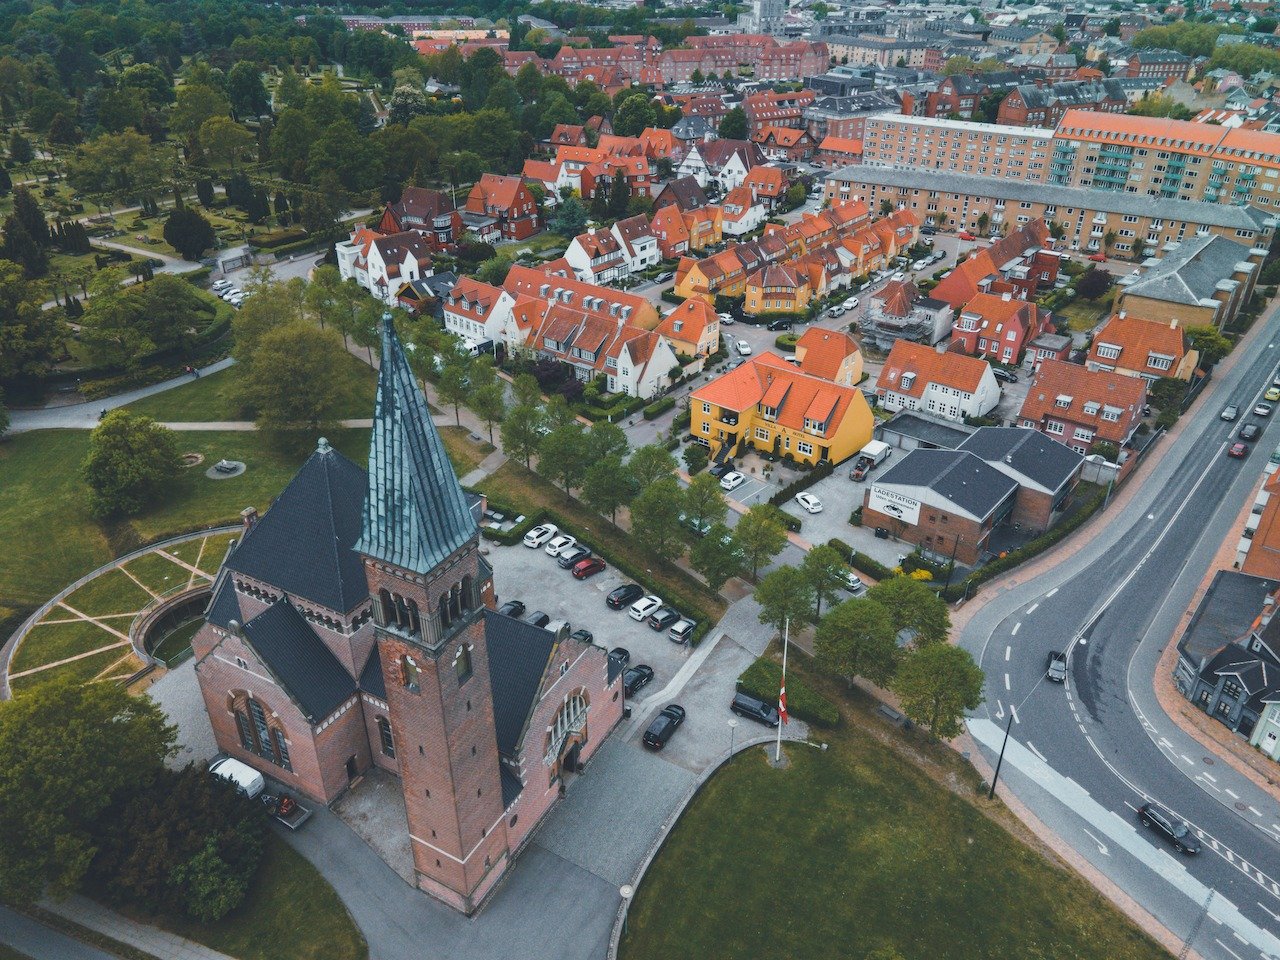 📍Odense, Denmark

Ansgar Kirke is situated right next to Munke Mose park in Odense, Denmark. It is relatively modern, with its construction being finished in 1902, making it the first church built in Odense since the Middle Ages. It is considered to